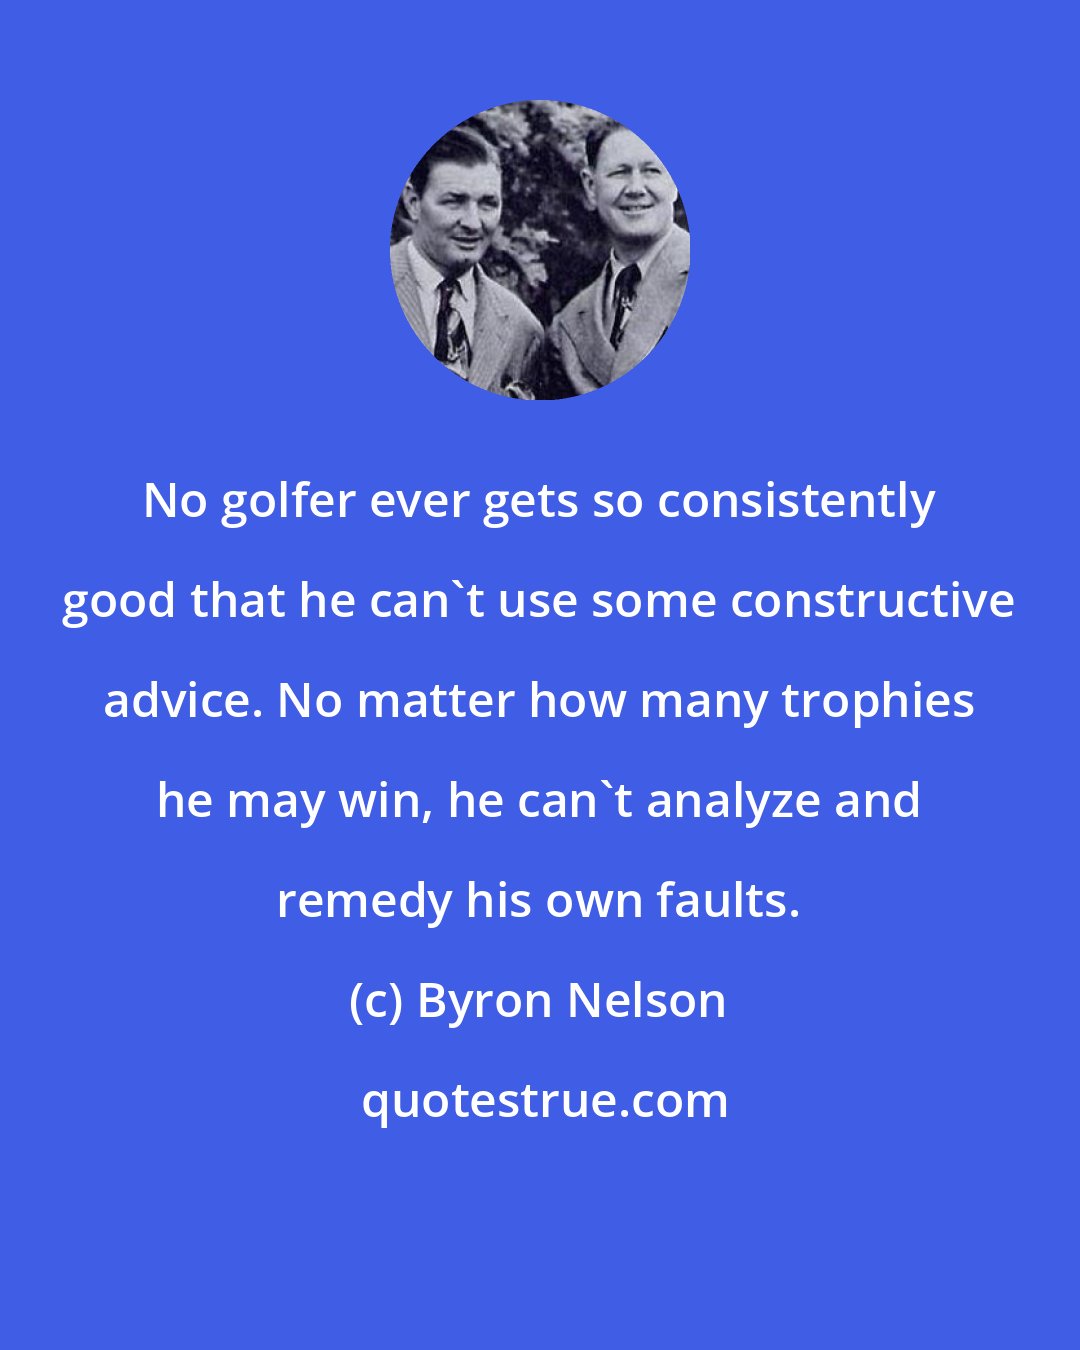 Byron Nelson: No golfer ever gets so consistently good that he can't use some constructive advice. No matter how many trophies he may win, he can't analyze and remedy his own faults.